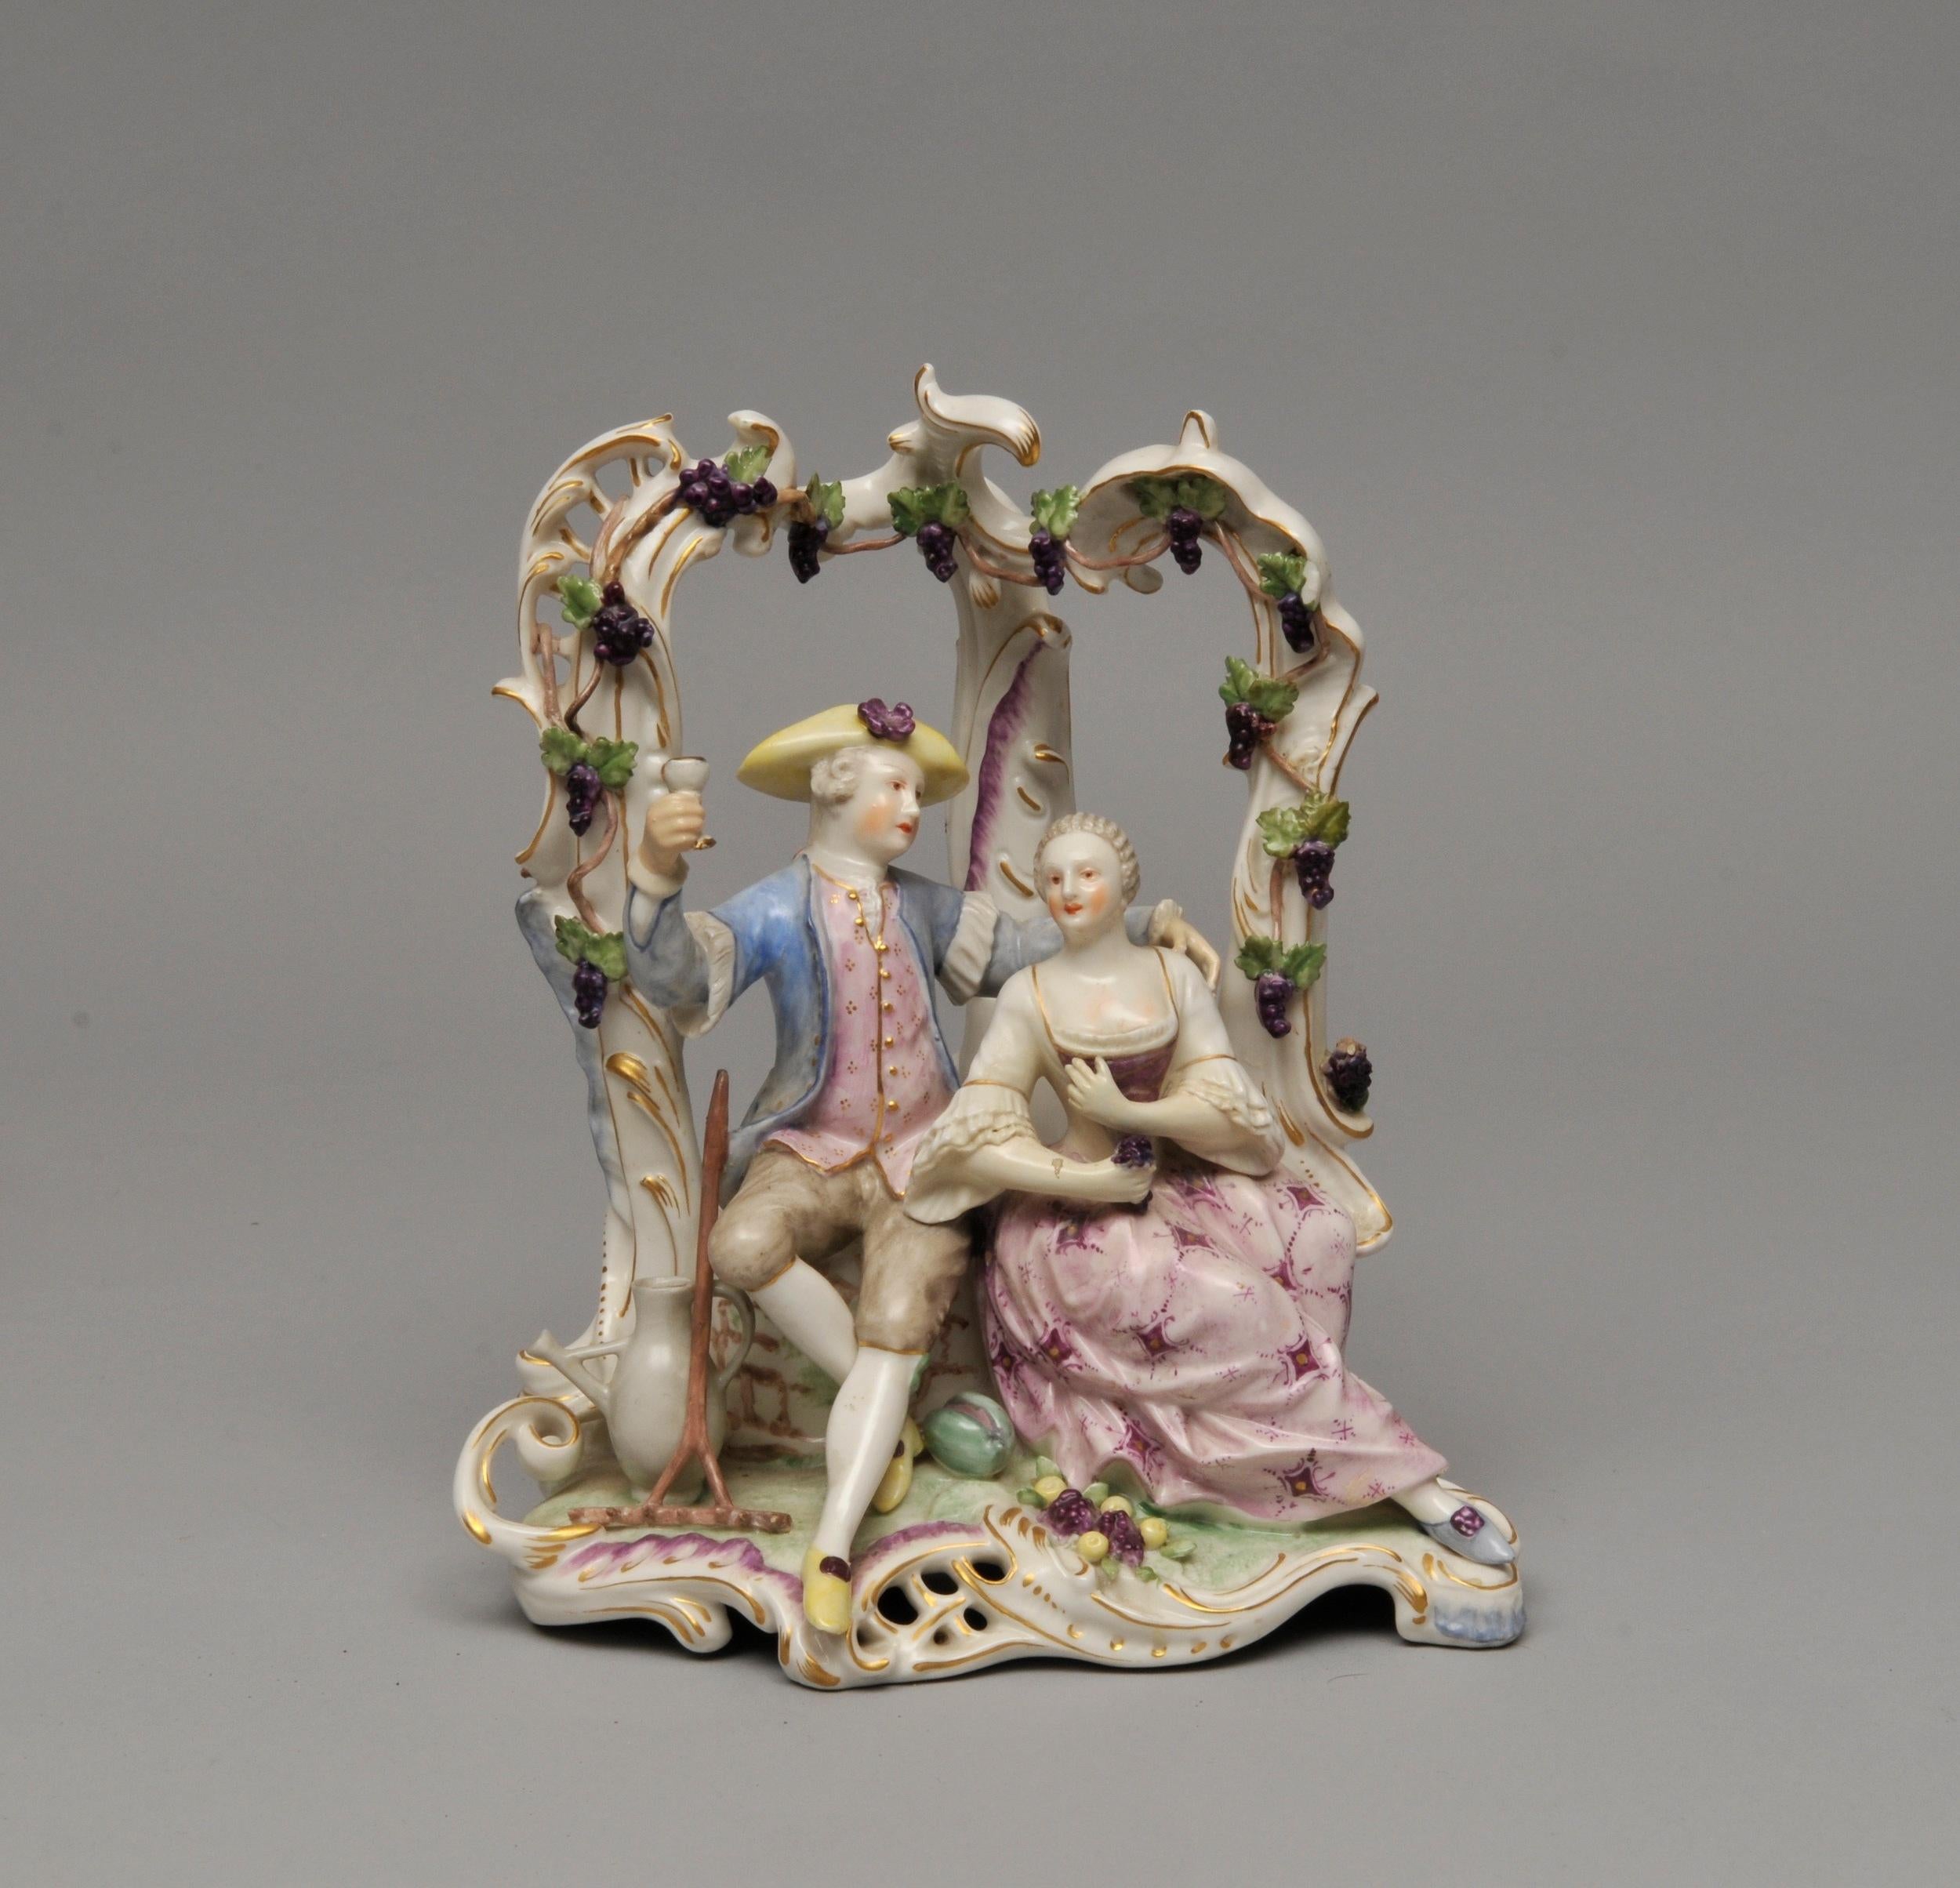 'Courting Couple'

Measure: 23cm height 

A beautiful example of Royal Derby porcelain, circa 19th century. With mark on base.